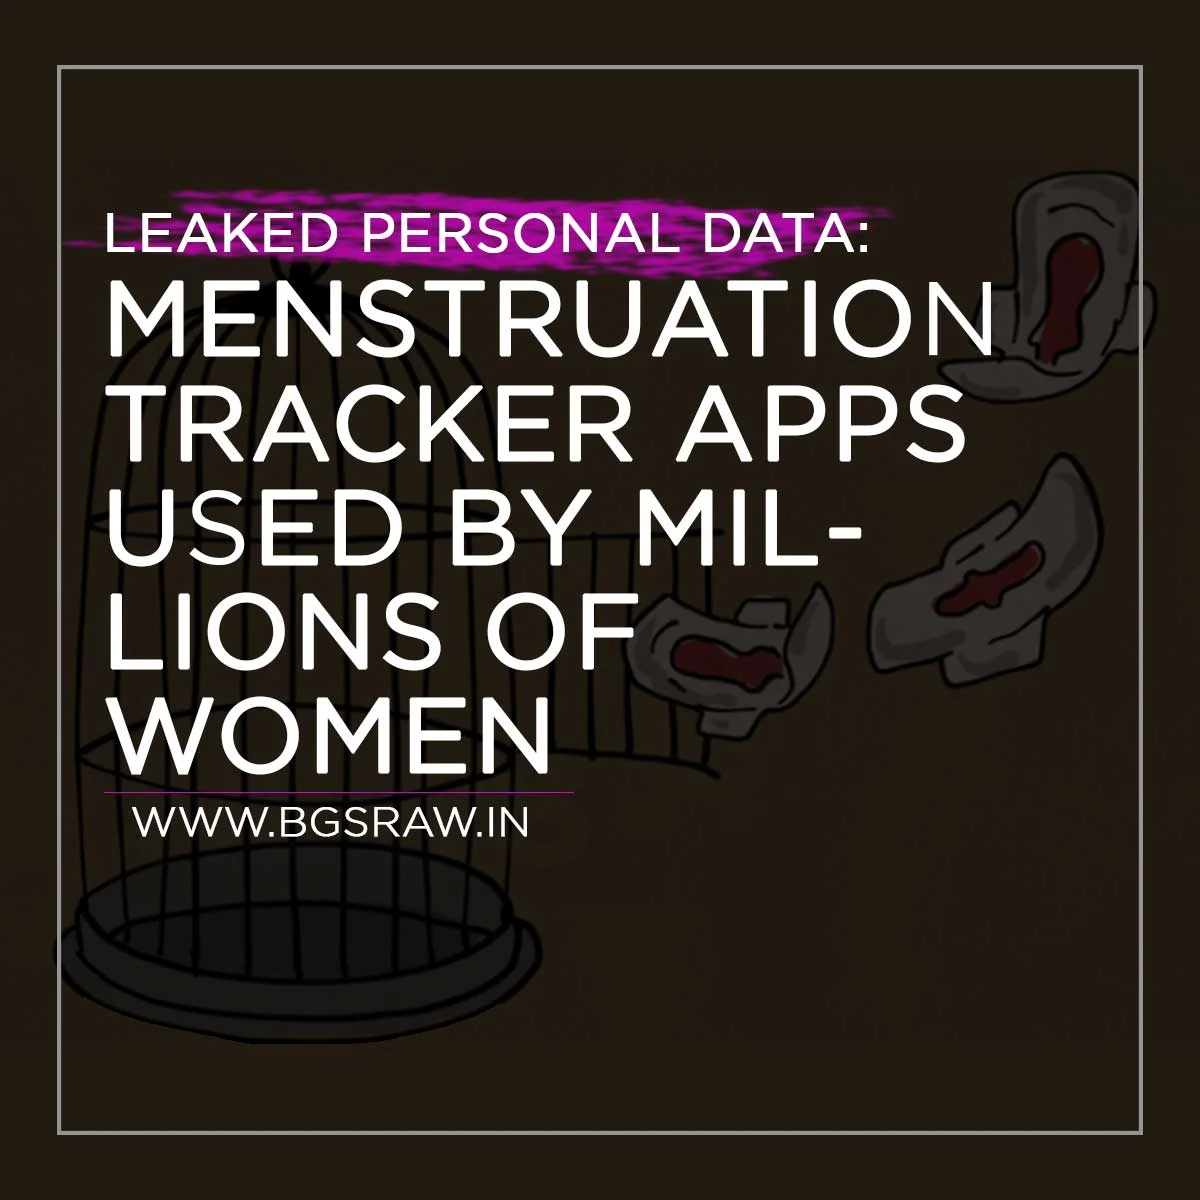 Menstruation Tracker Apps Used by Millions of Women news. Protection of personal sex